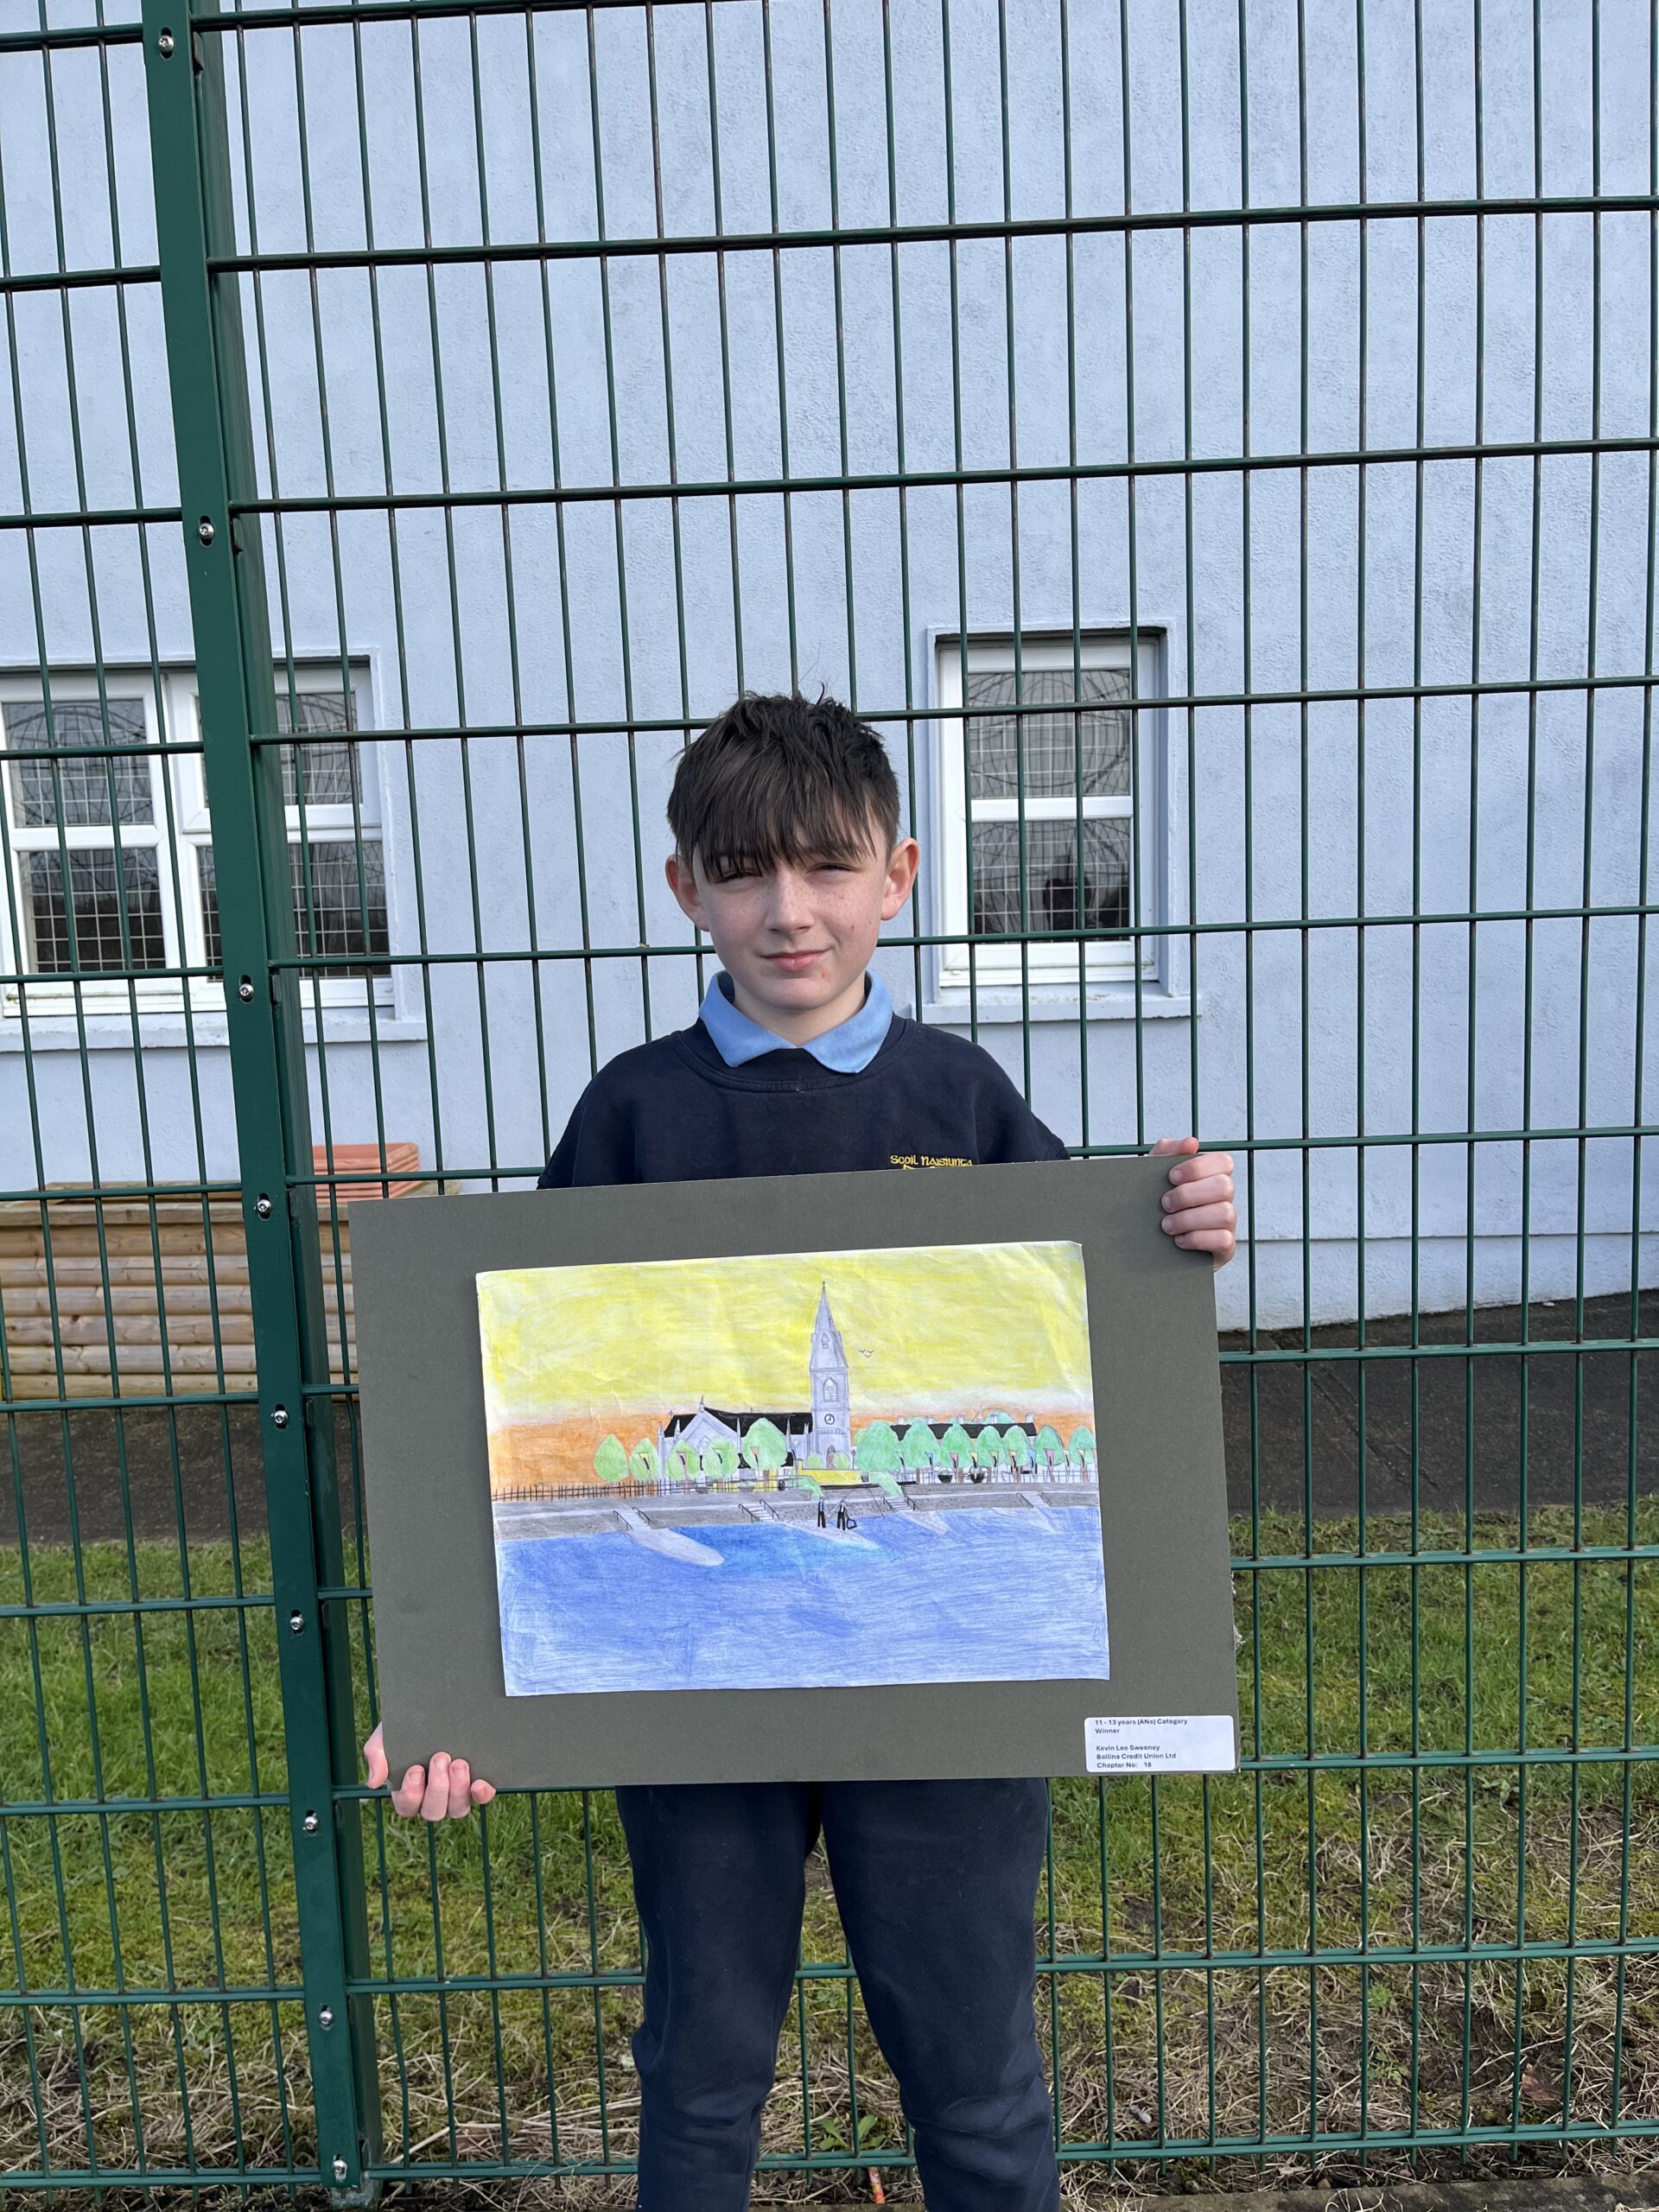 Credit Union Art Competition National Winner!